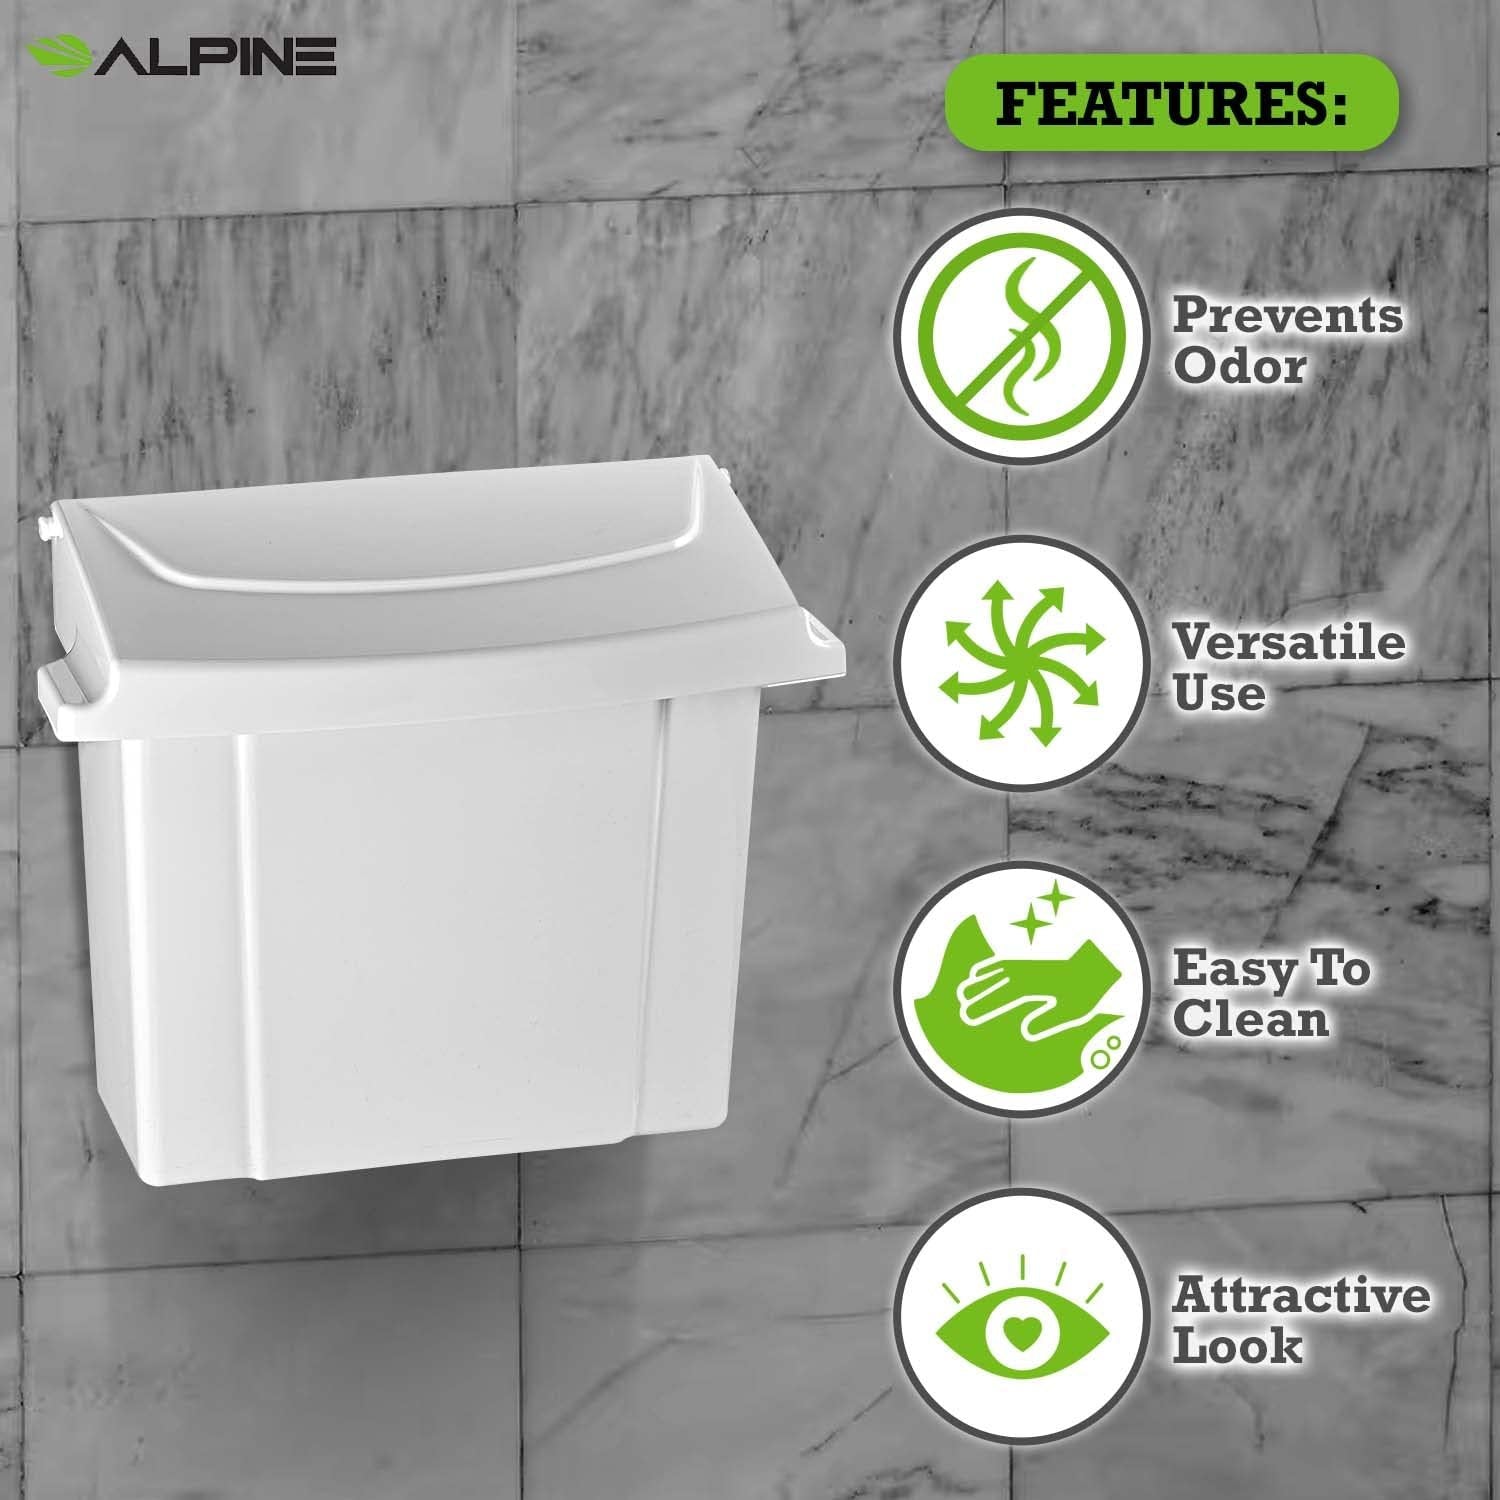 Alpine Industries Sanitary Napkin Receptacle - White, Pack of 1 - Odor-Sealing, Durable ABS Plastic - Free Shipping & Returns